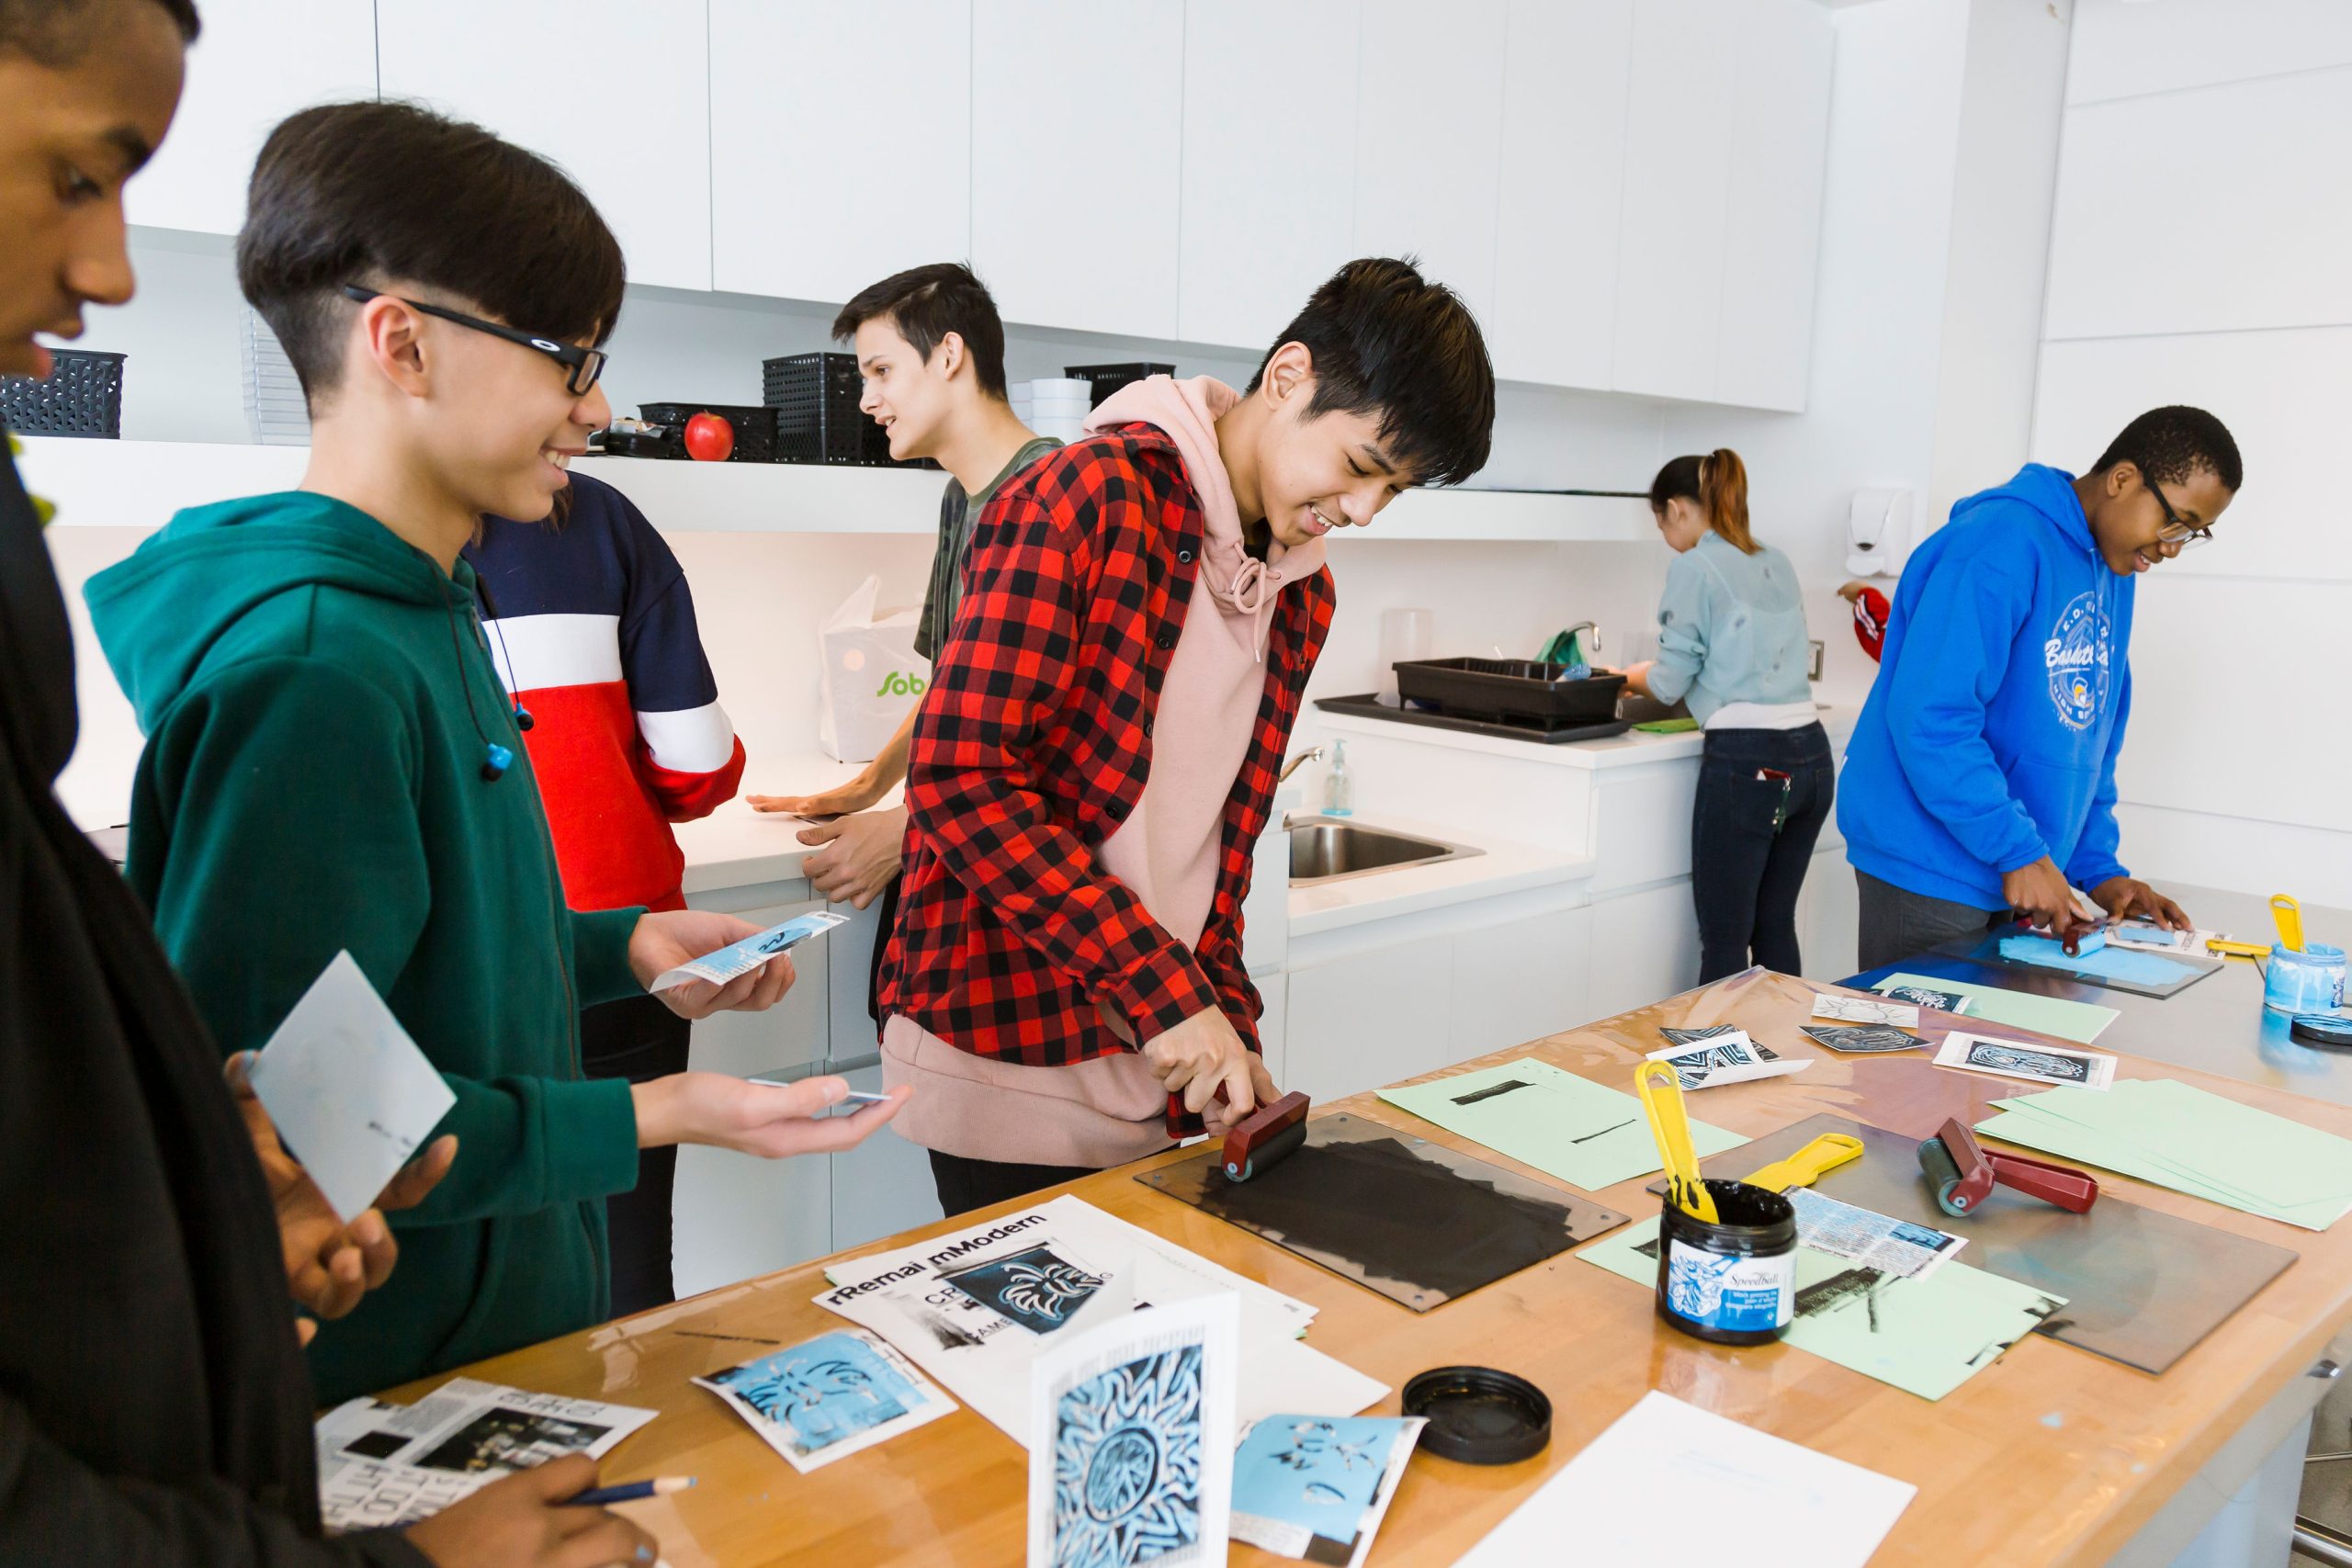 Teens work together on a printmaking activity in Remai Modern's learning studio.